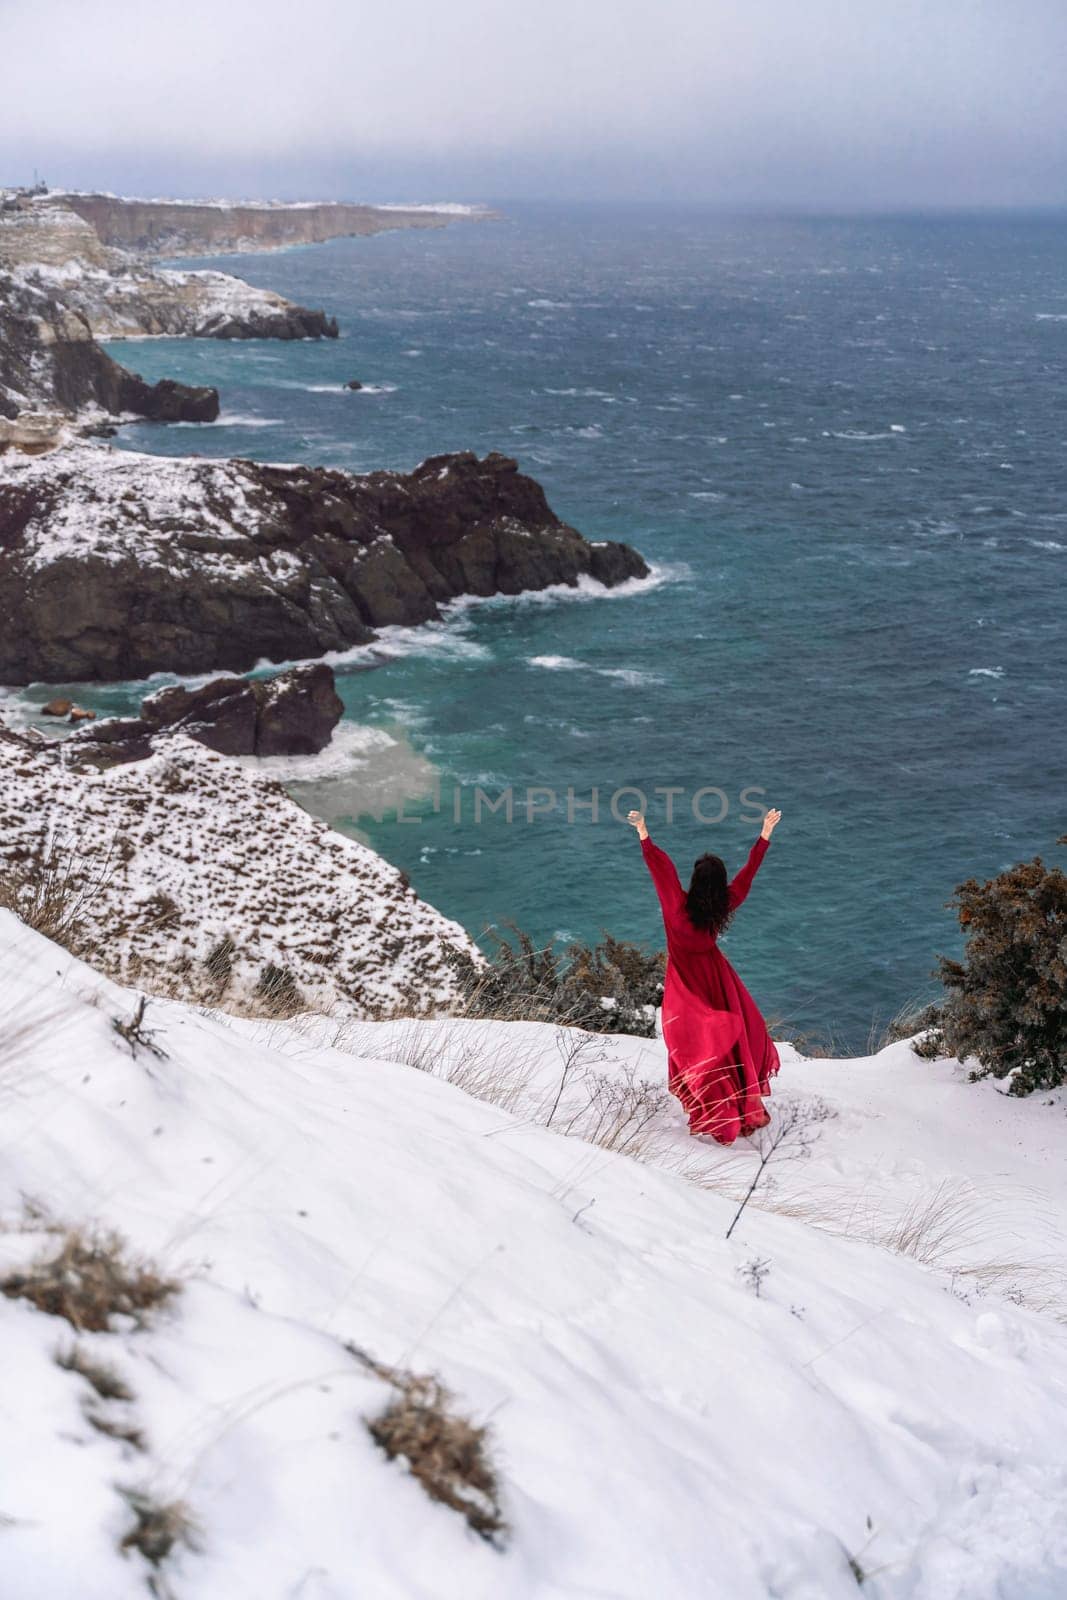 Woman red dress snow sea. Happy woman in a red dress in the snowy mountains by the emerald sea. The wind blows her clothes, posing against sea and snow background. by Matiunina